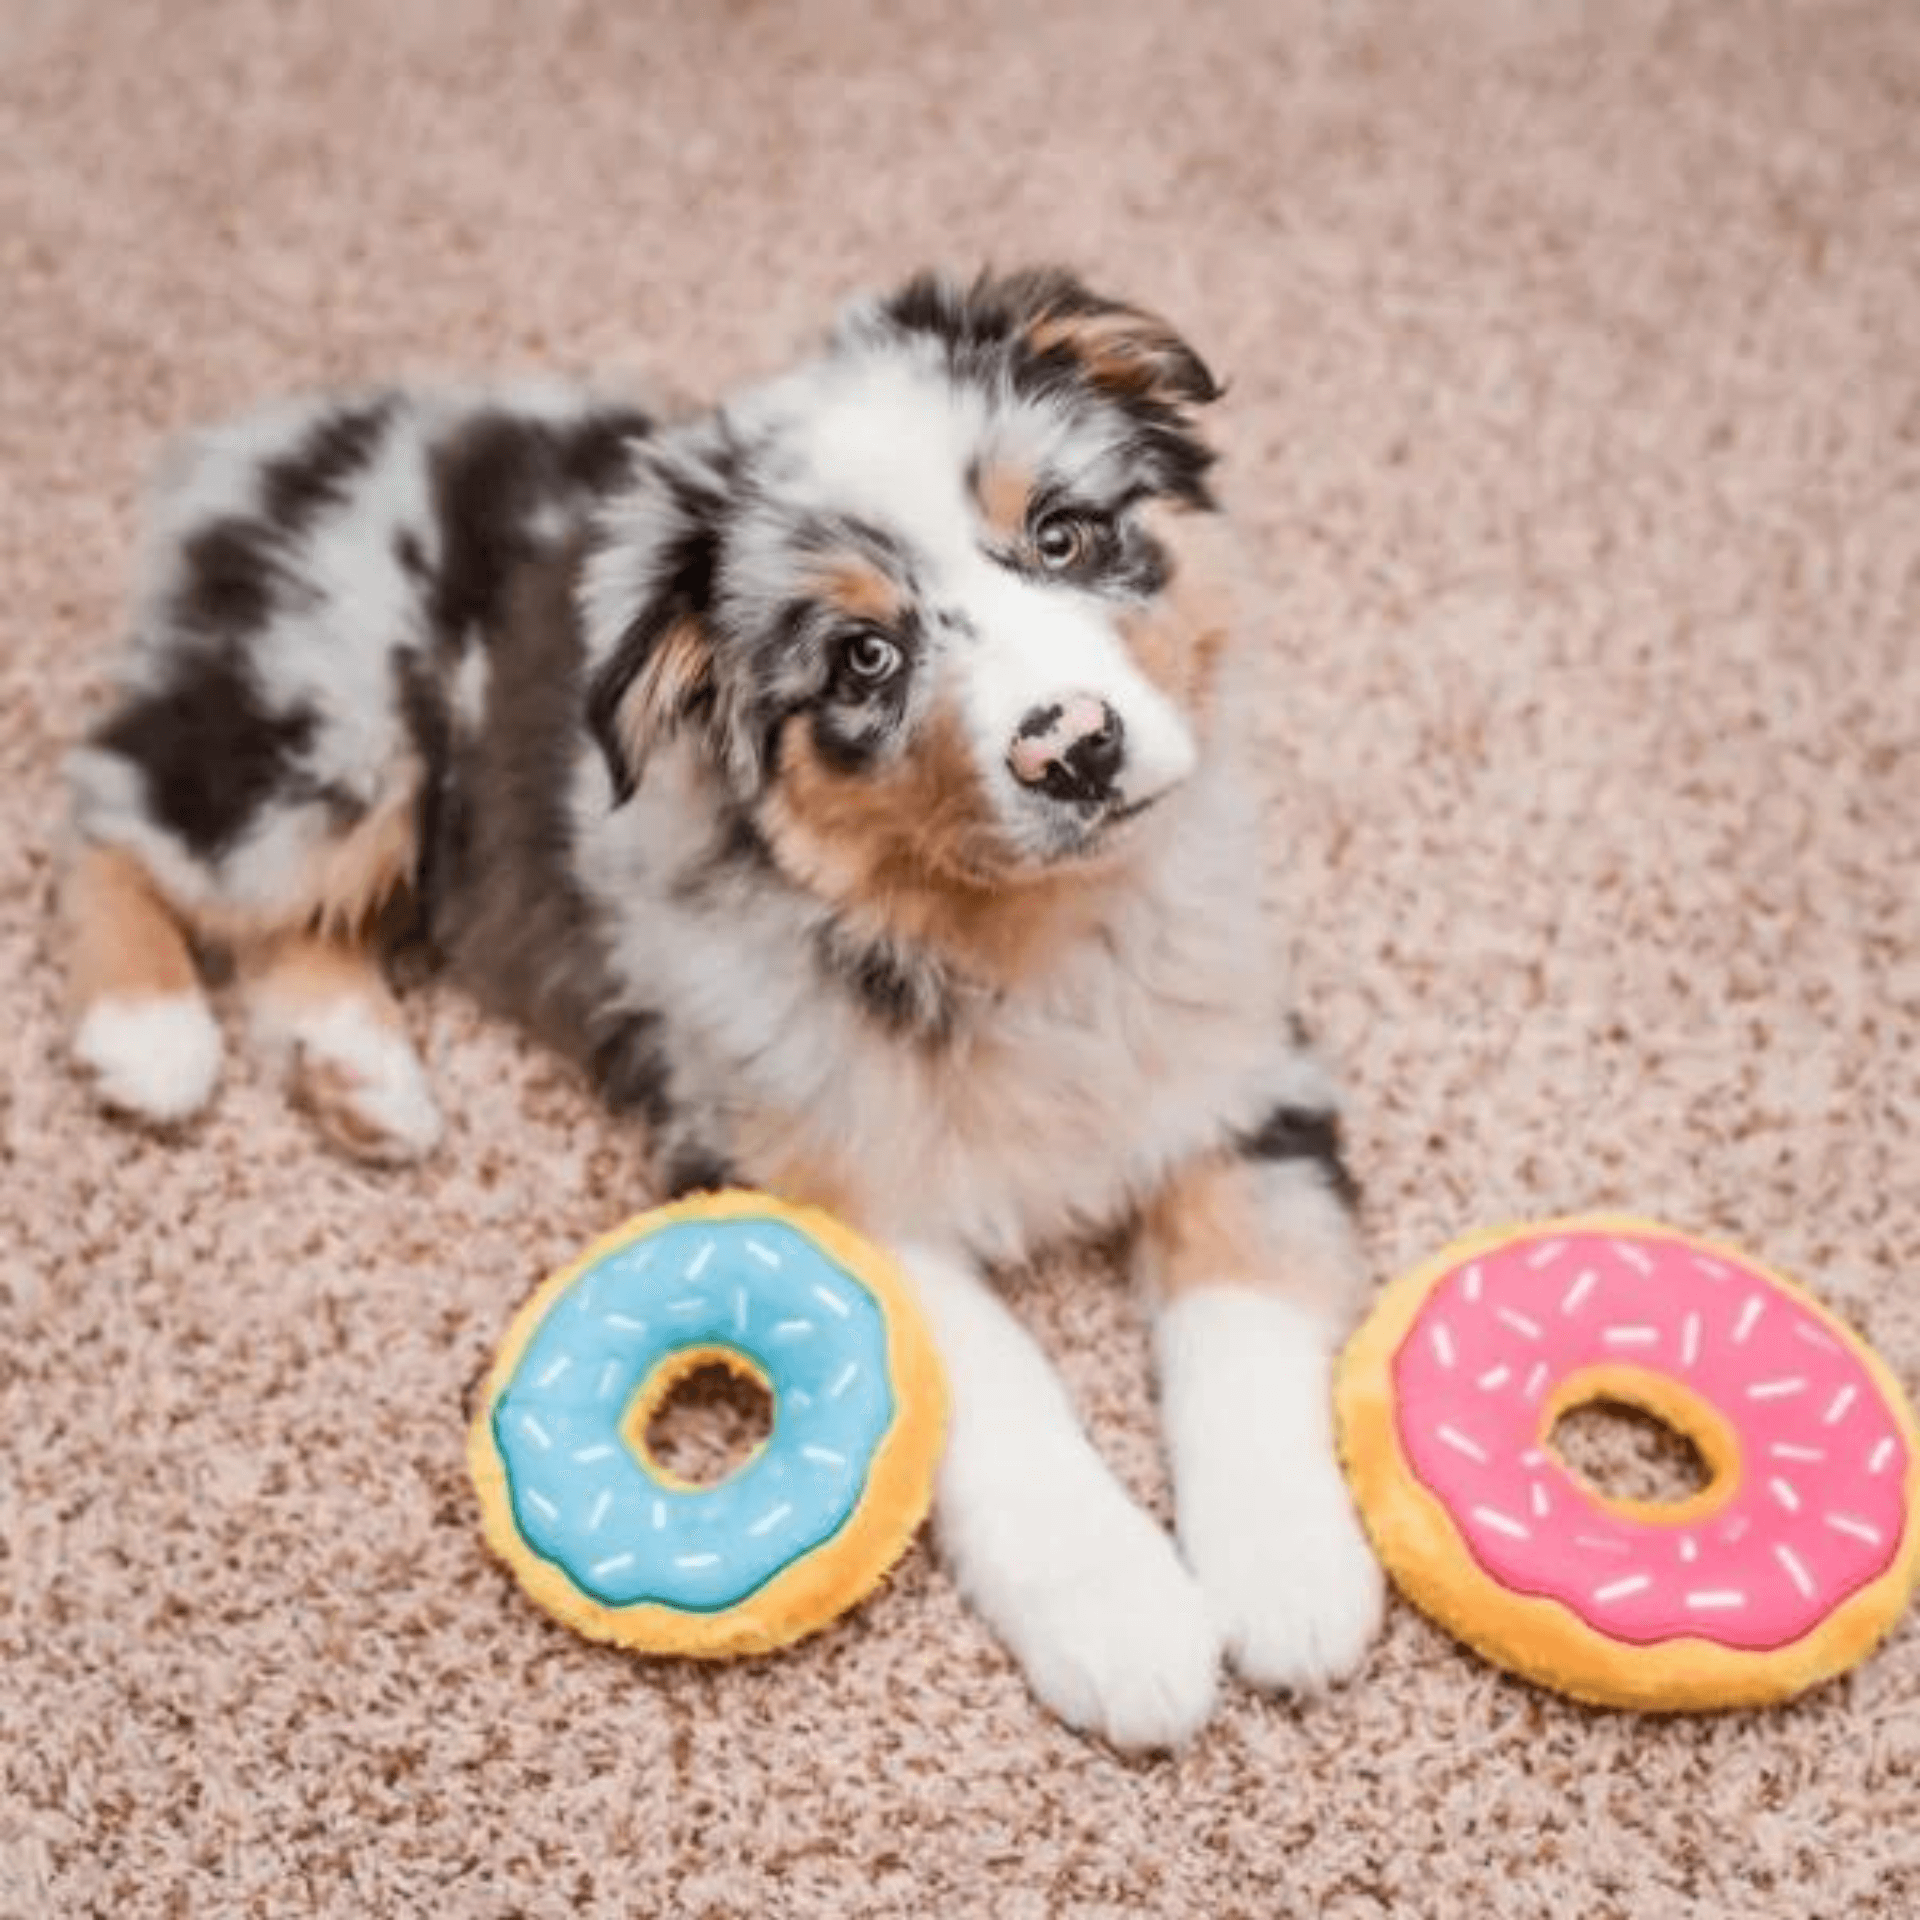 Squeaky dog toy Mini Donutz let's Pawty 